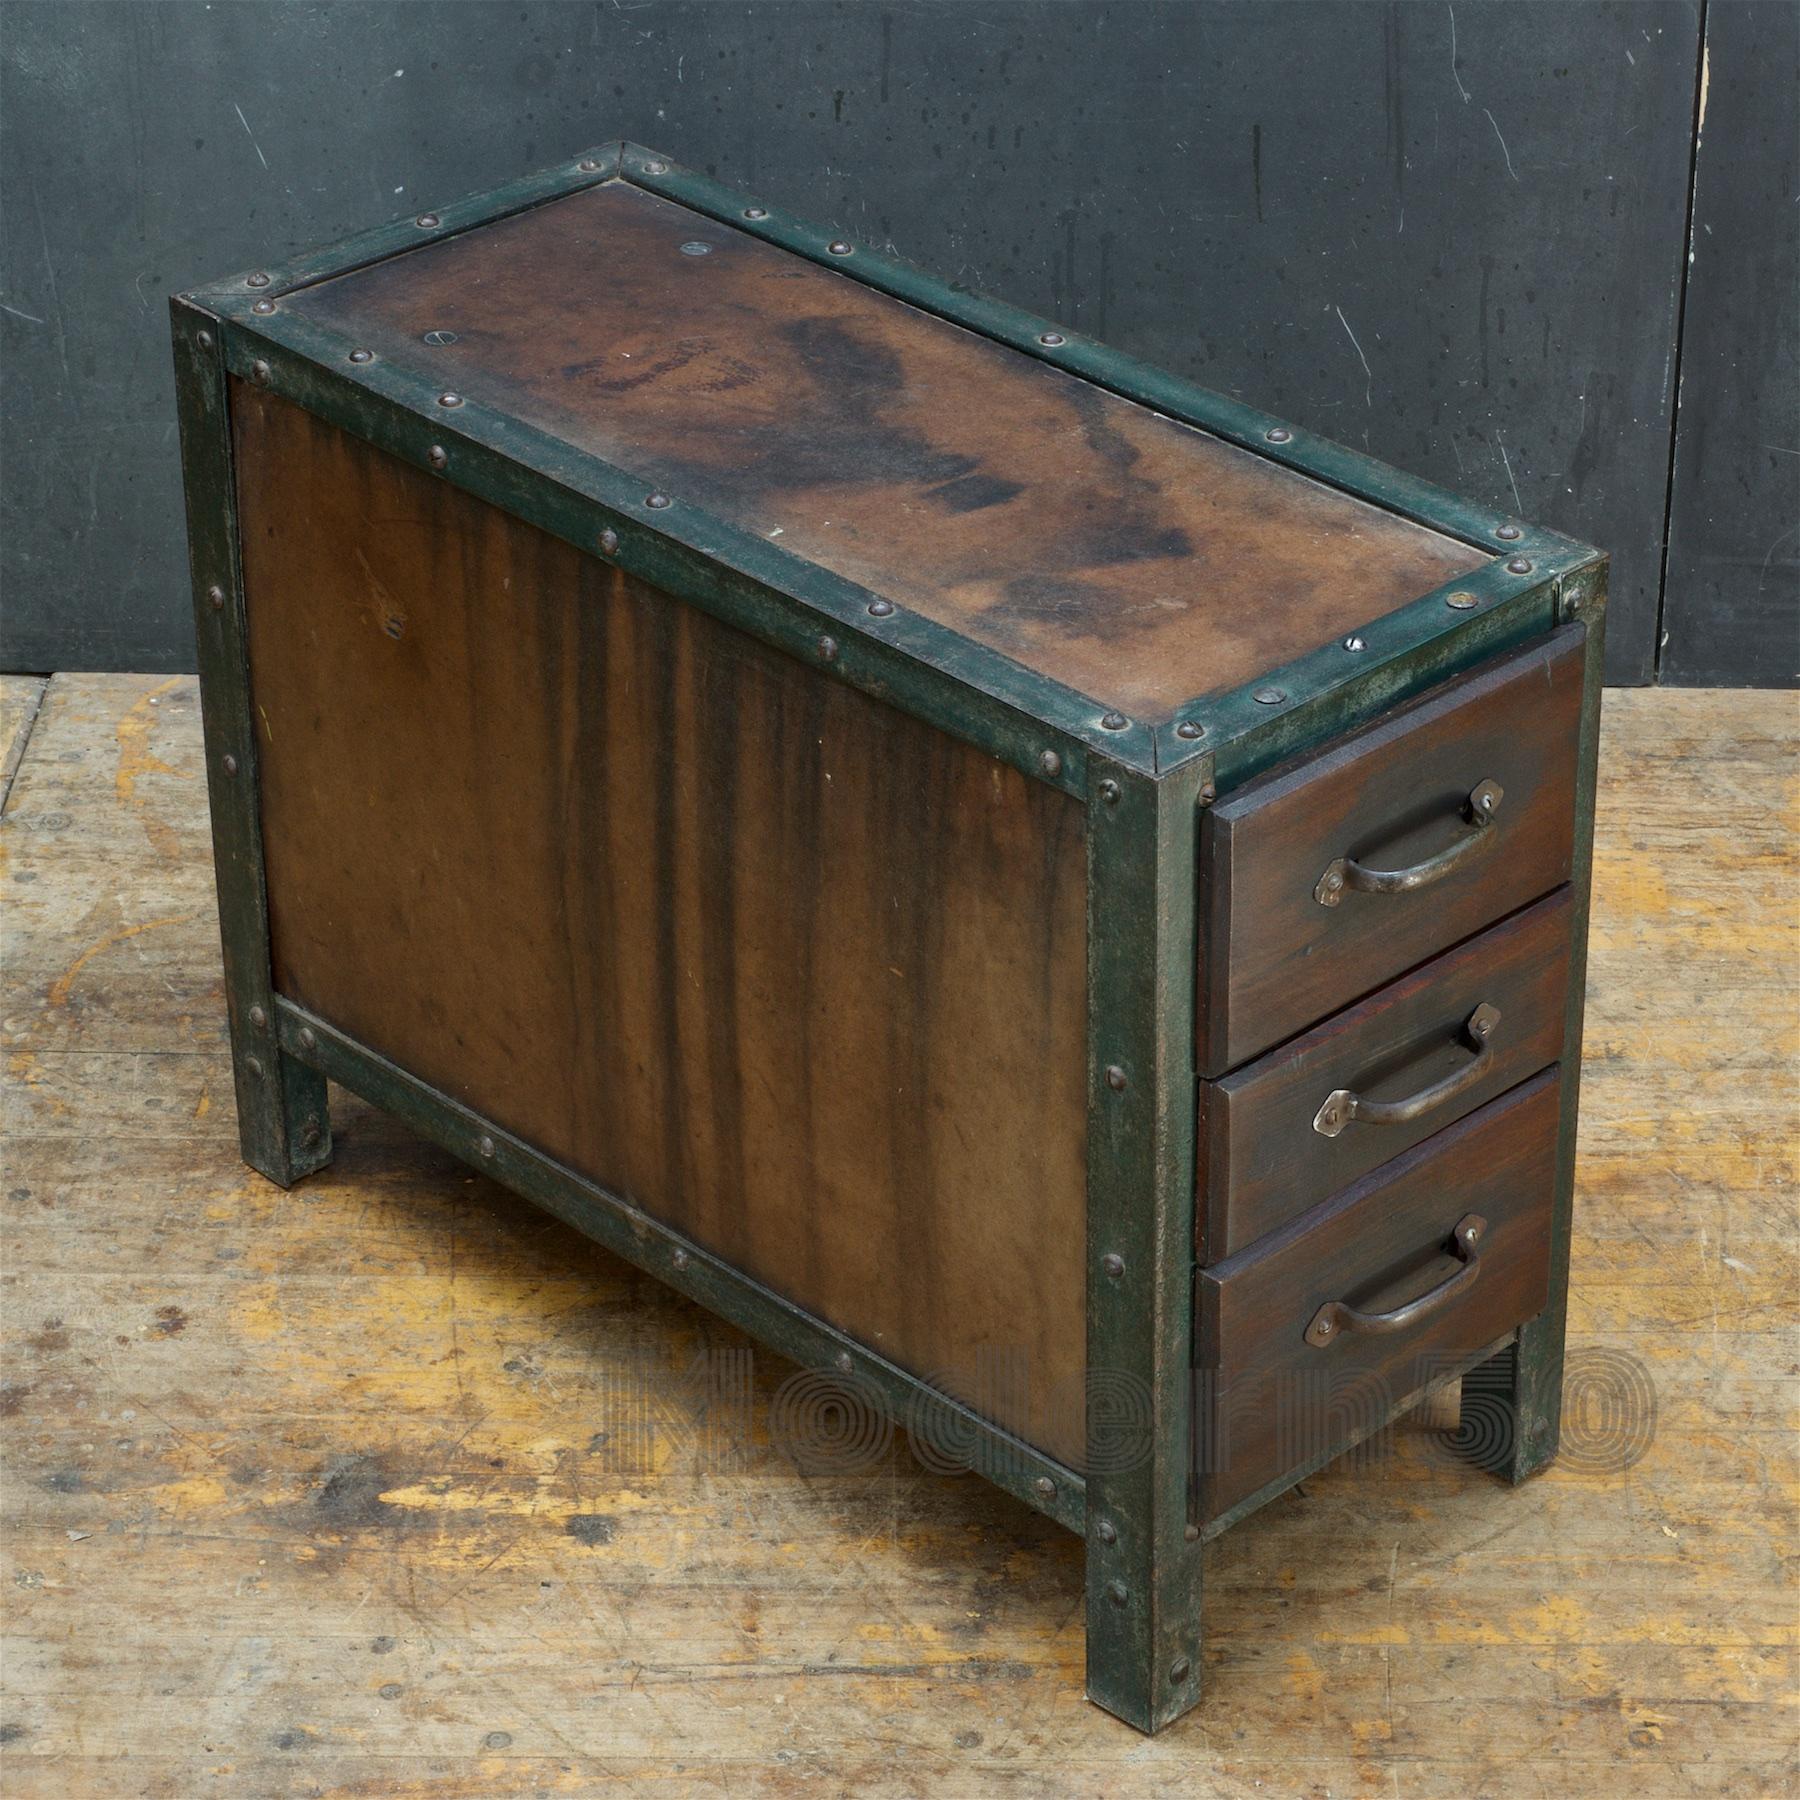 1930s Industrial Workshop Chest Cabinet Factory Vintage Nightstand Drawers Steel In Distressed Condition In Hyattsville, MD